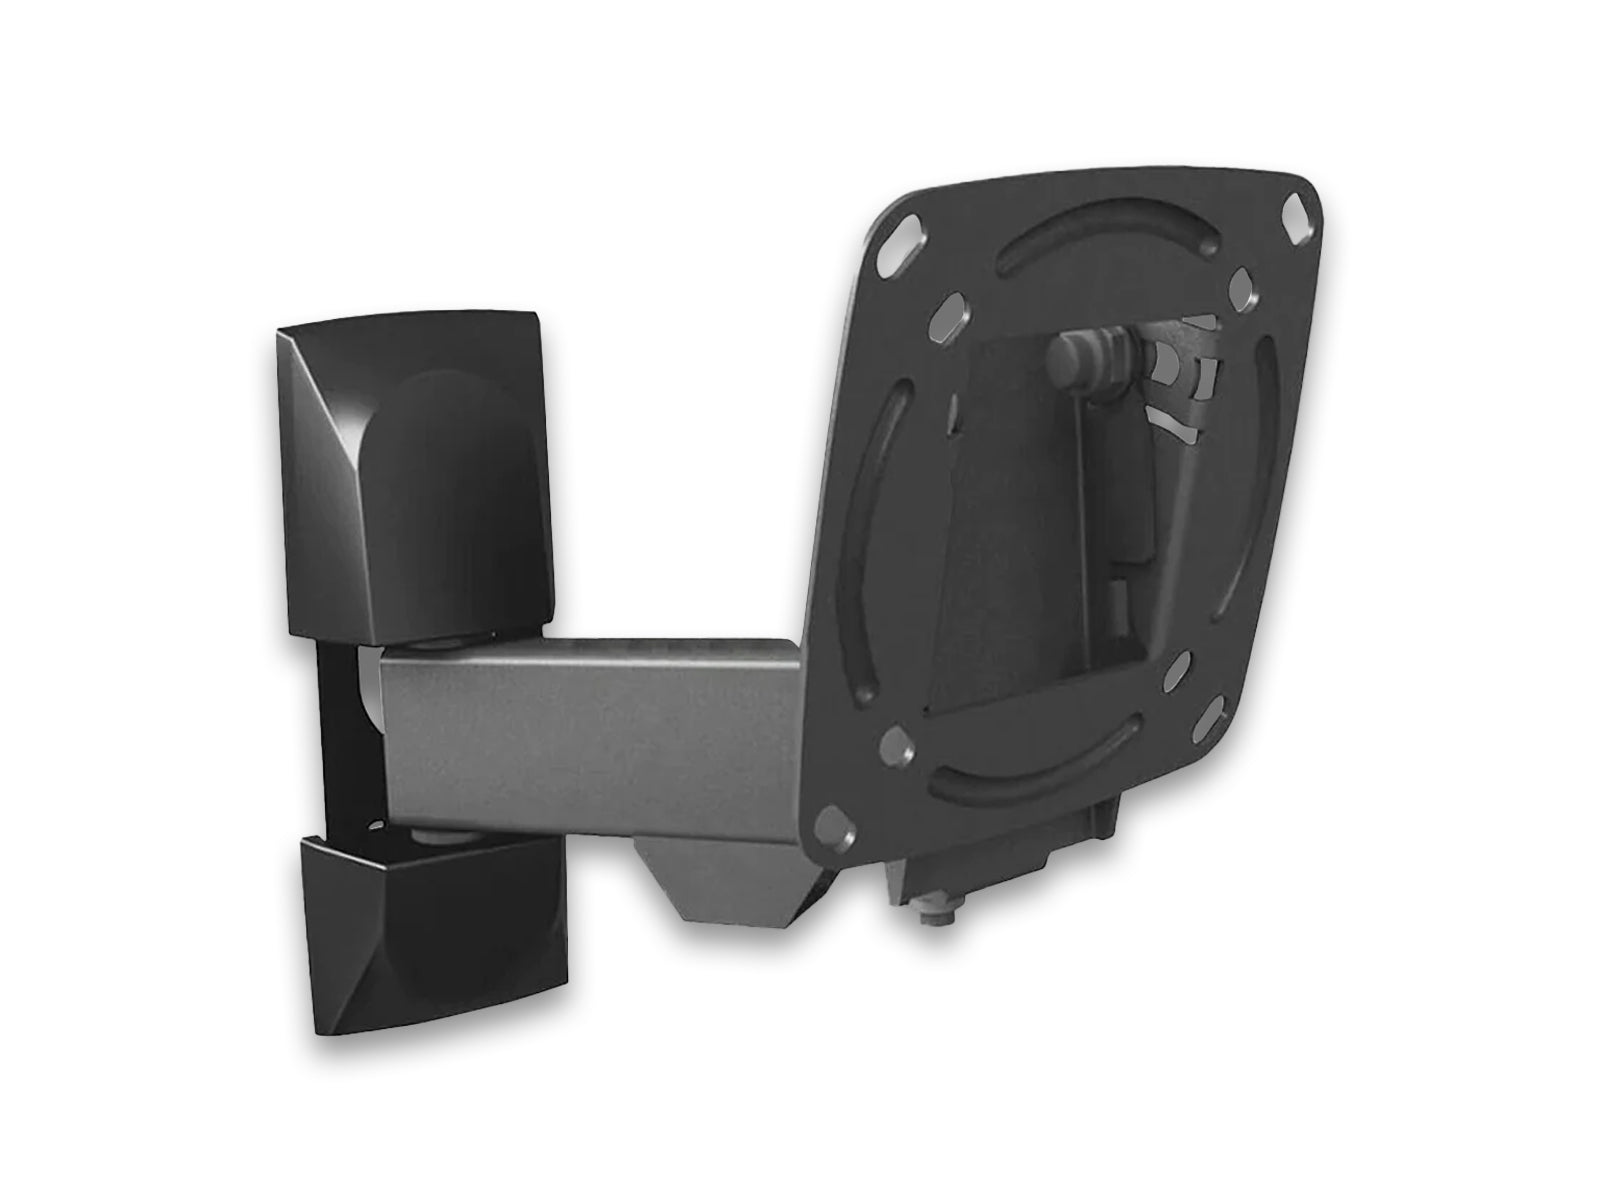 TV Wall Mount Fits Sizes 15-29" TVs Supports TVs up to 15Kg